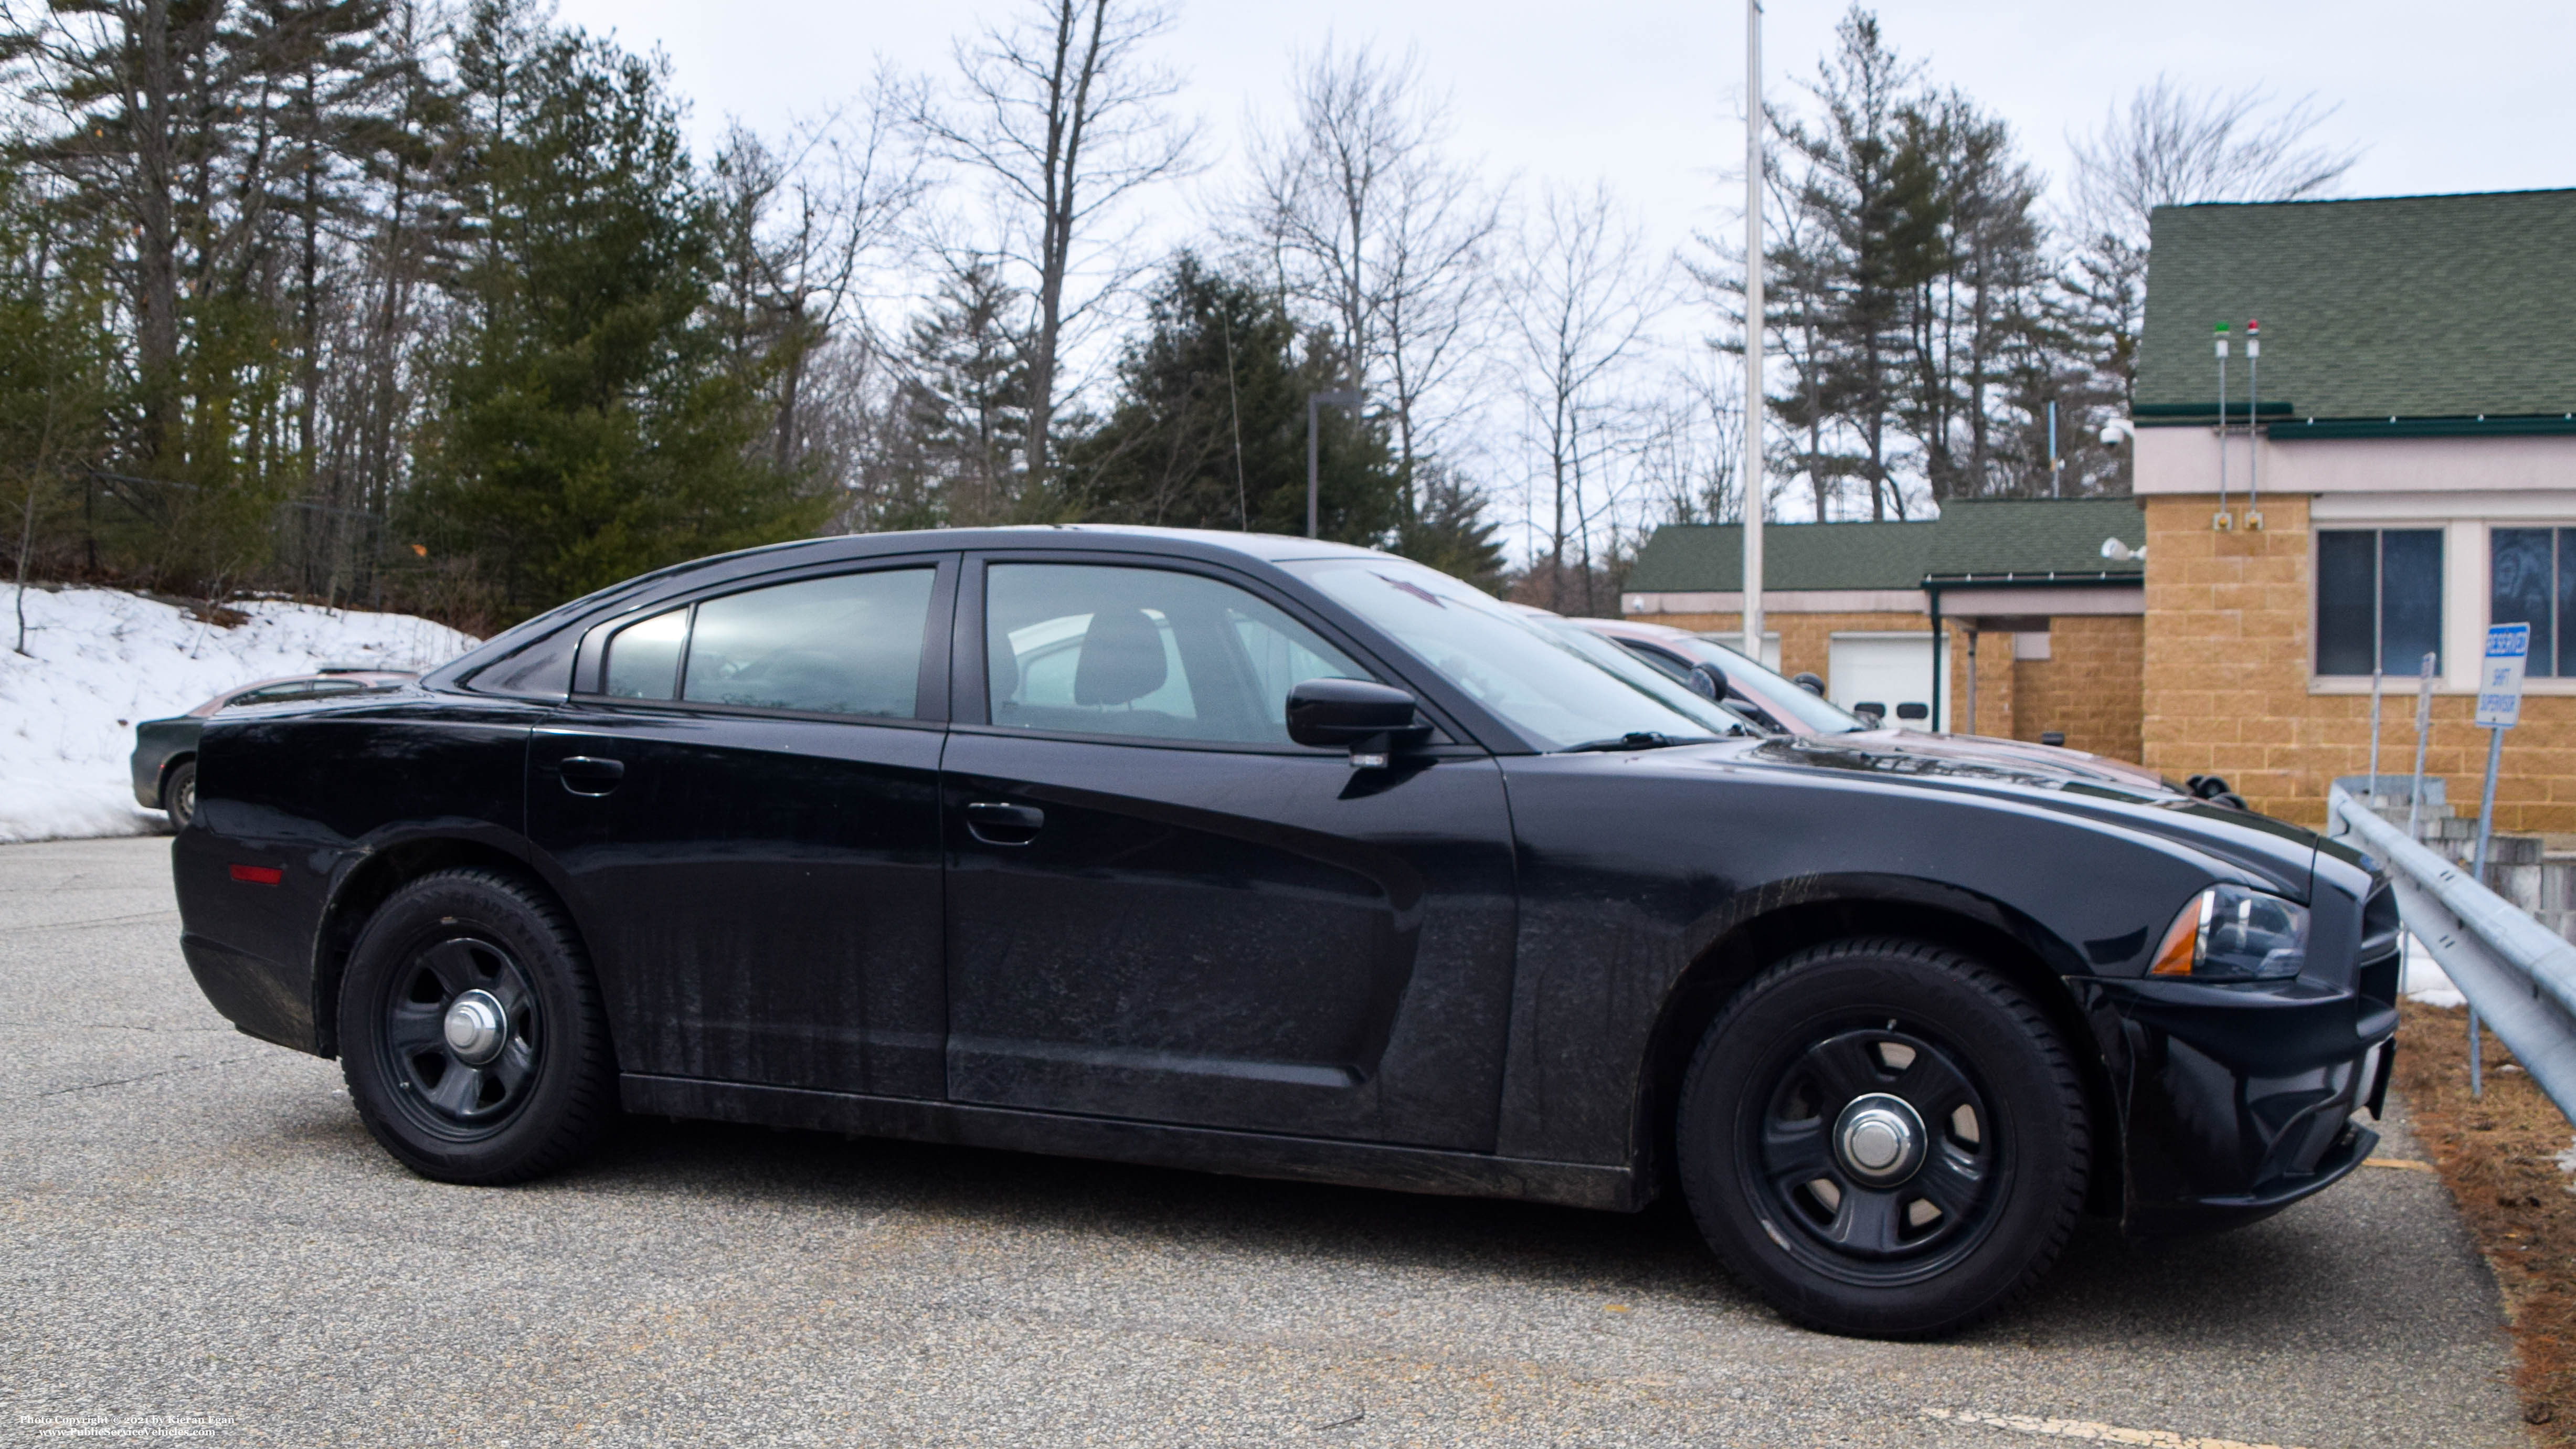 A photo  of New Hampshire State Police
            Cruiser 450, a 2011-2014 Dodge Charger             taken by Kieran Egan